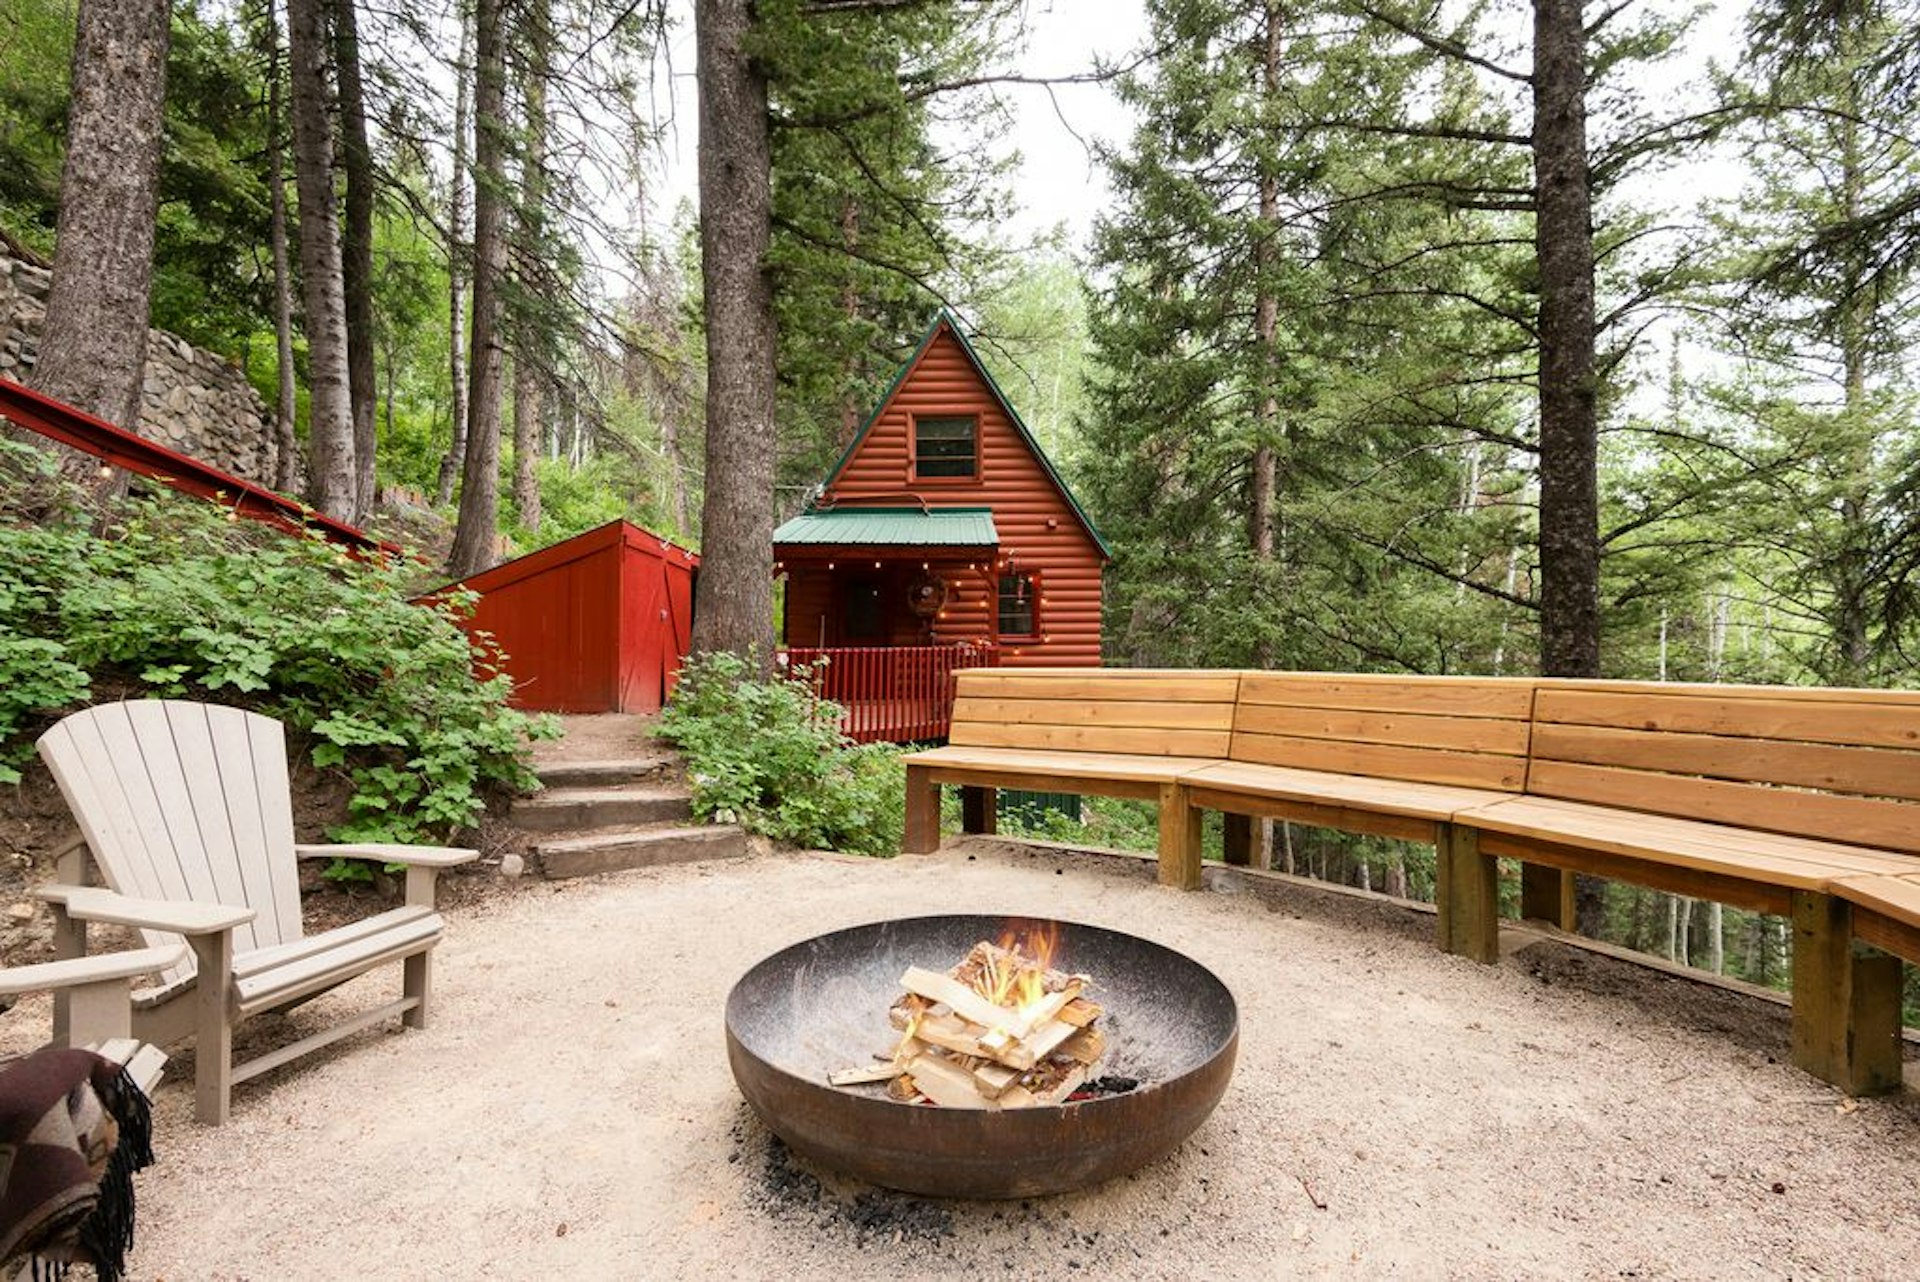 A red A-frame cabin surrounded by tall trees with a fire pit in the foreground